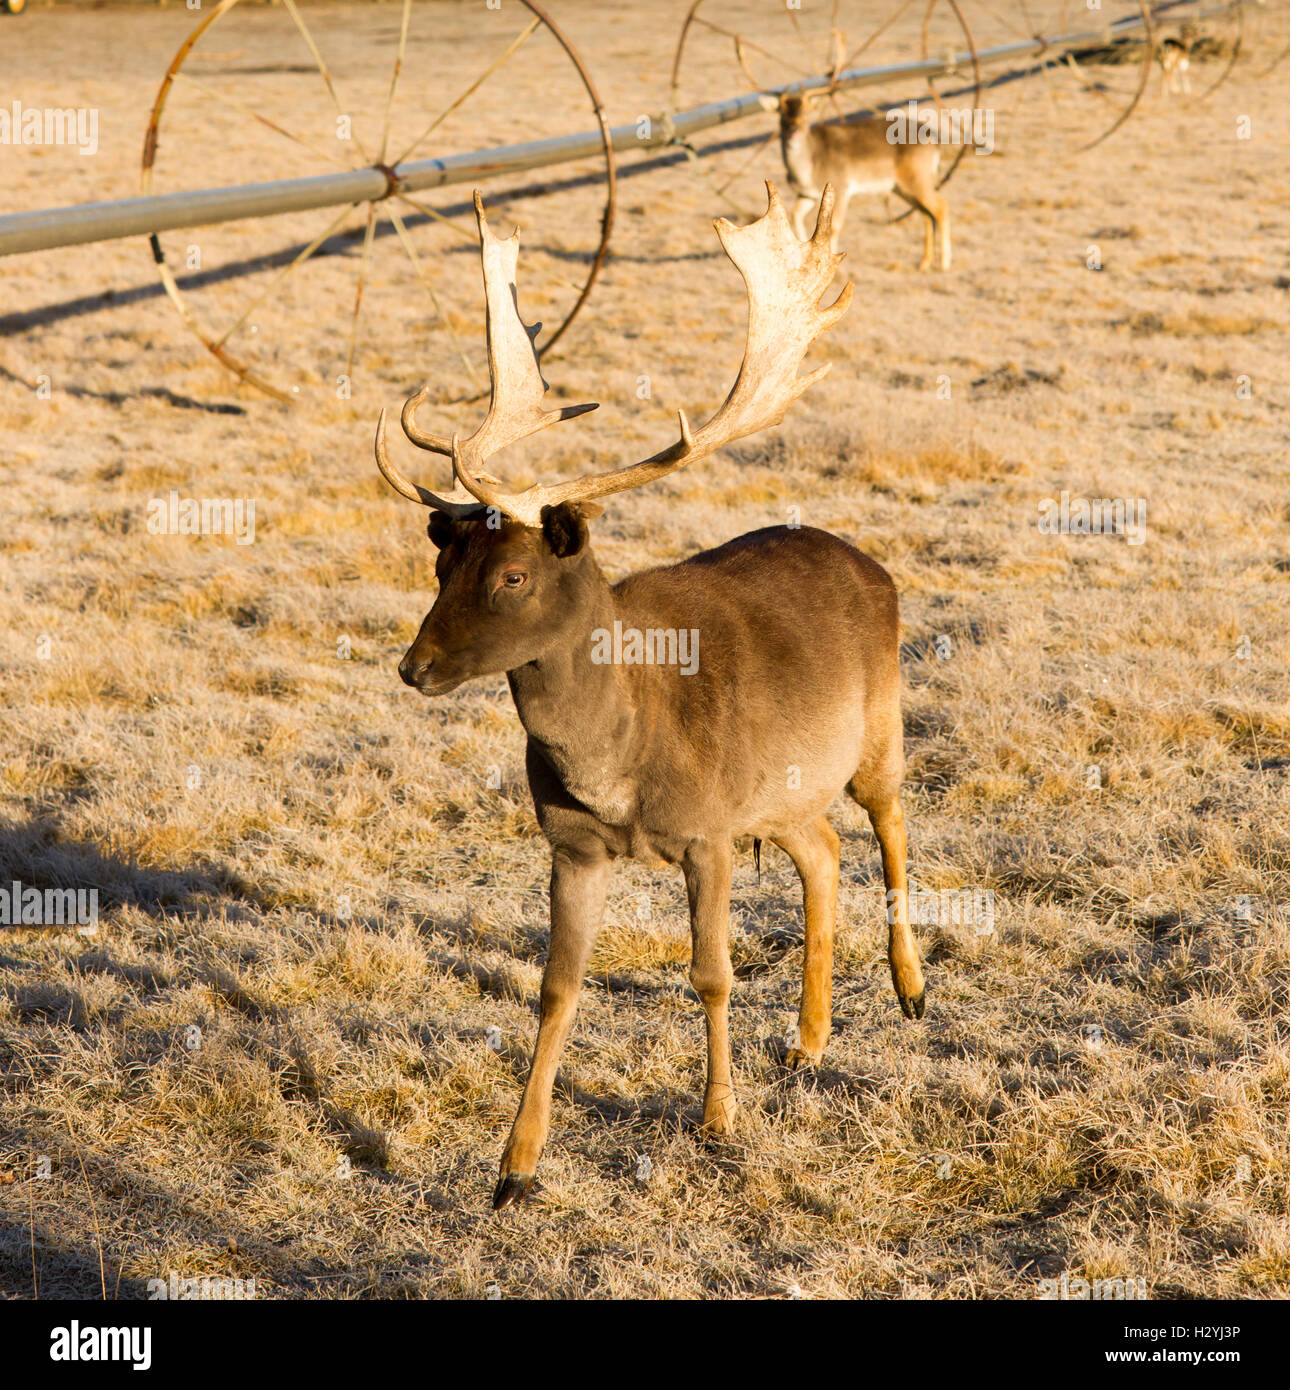 What Can You Do With Deer Antlers? - Tioga Ranch